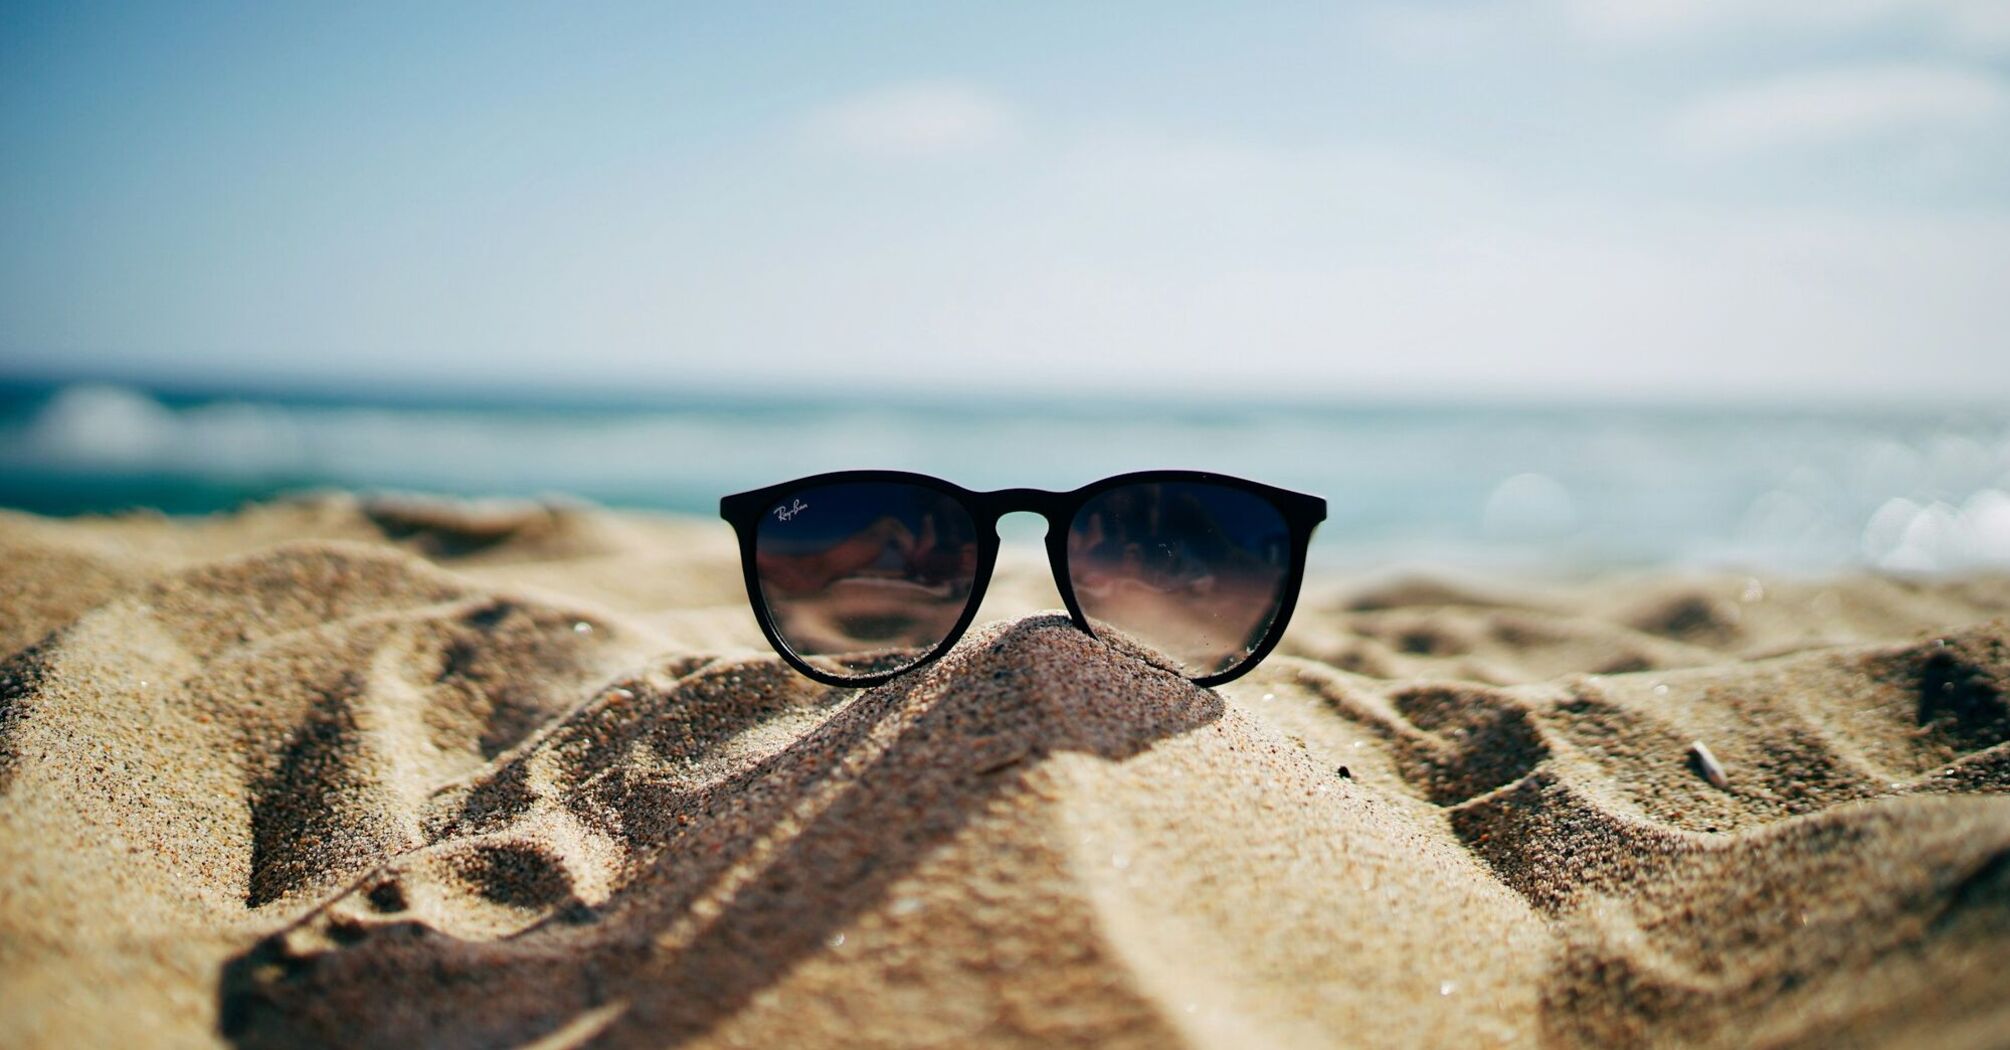 A pair of sunglasses lying on a sandy beach with a blurred ocean background